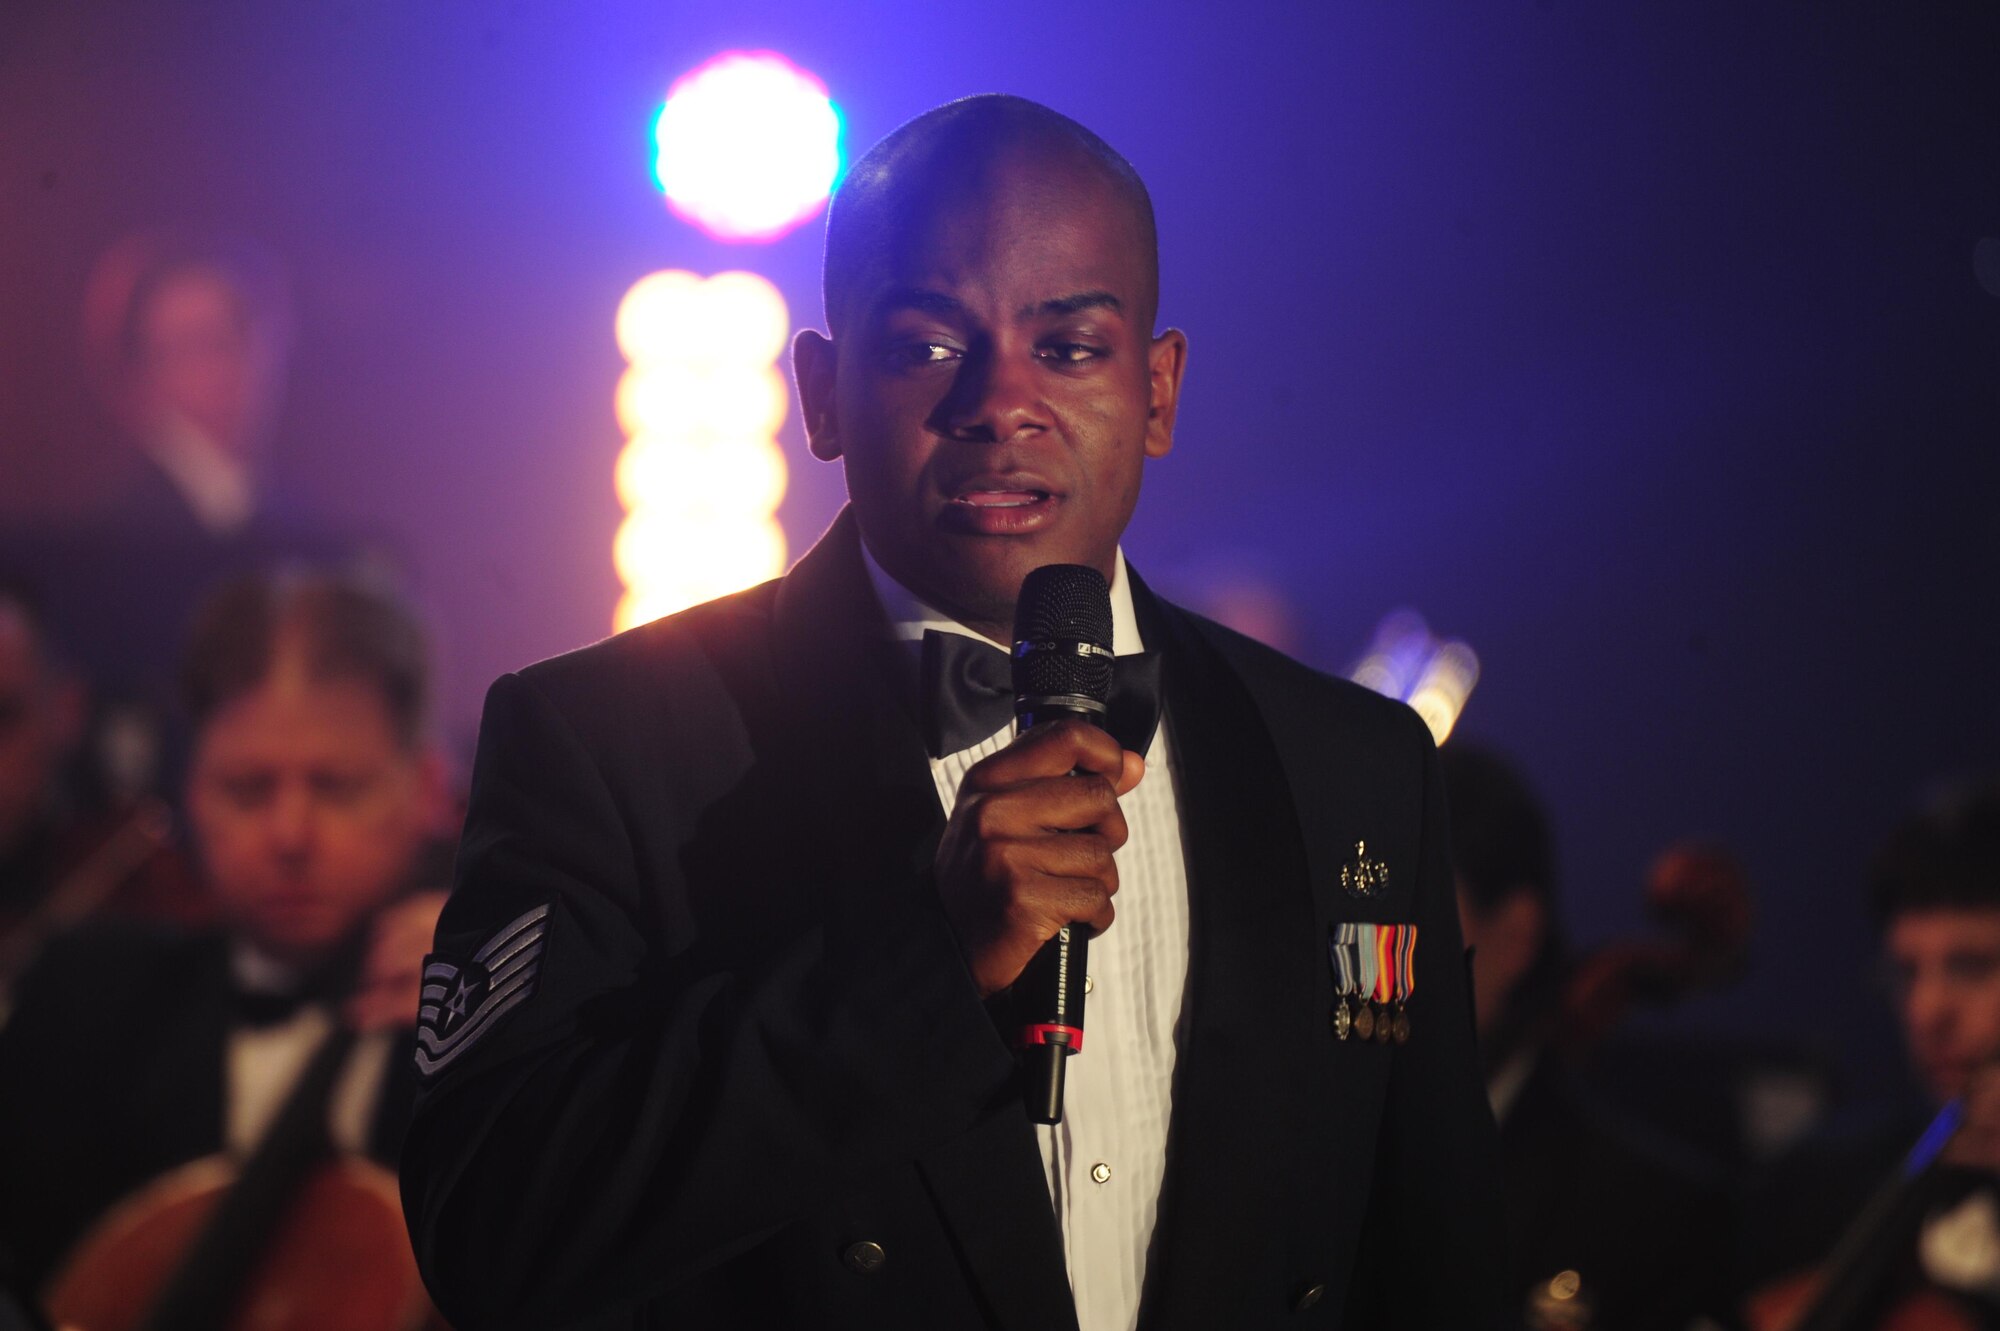 Tech. Sgt. Aaron Paige, U.S. Air Force Band vocalist, sings a solo performance at the Maryland Public Television studio during a live recording of the band’s Veteran’s Day tribute compositions in Owings Mills, MD., Nov. 06, 2015. Paige is a member of the Singing Sergeants, a vocal ensemble of the band. (U.S. Air Force photo/Senior Airman Joshua R. M. Dewberry)